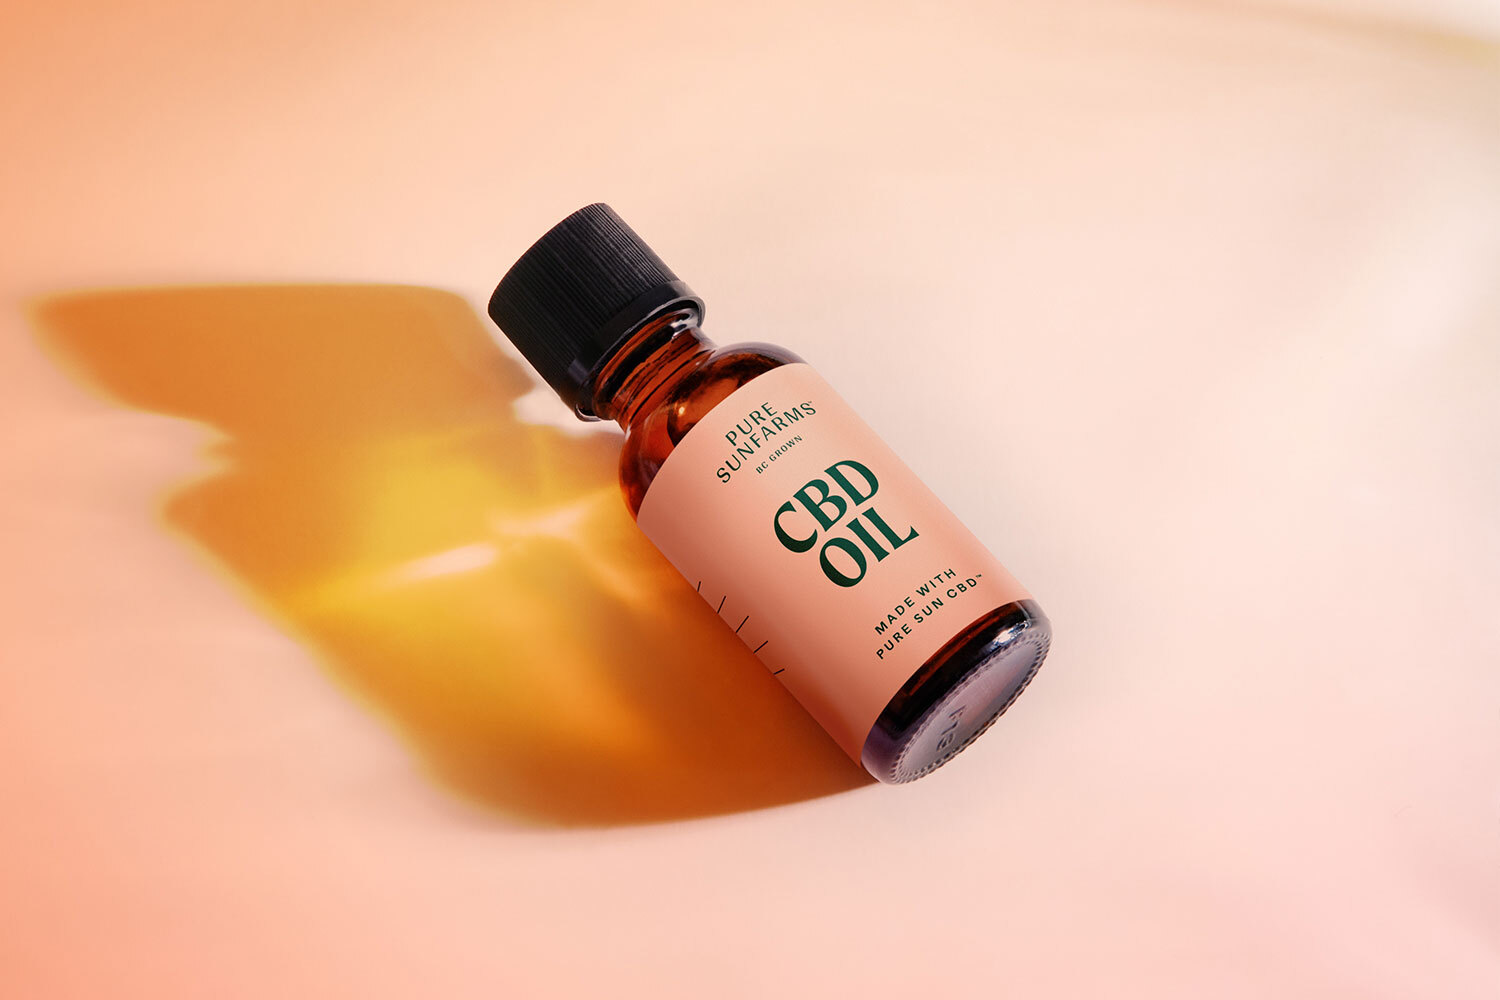 Most commonly asked questions about CBD Oil